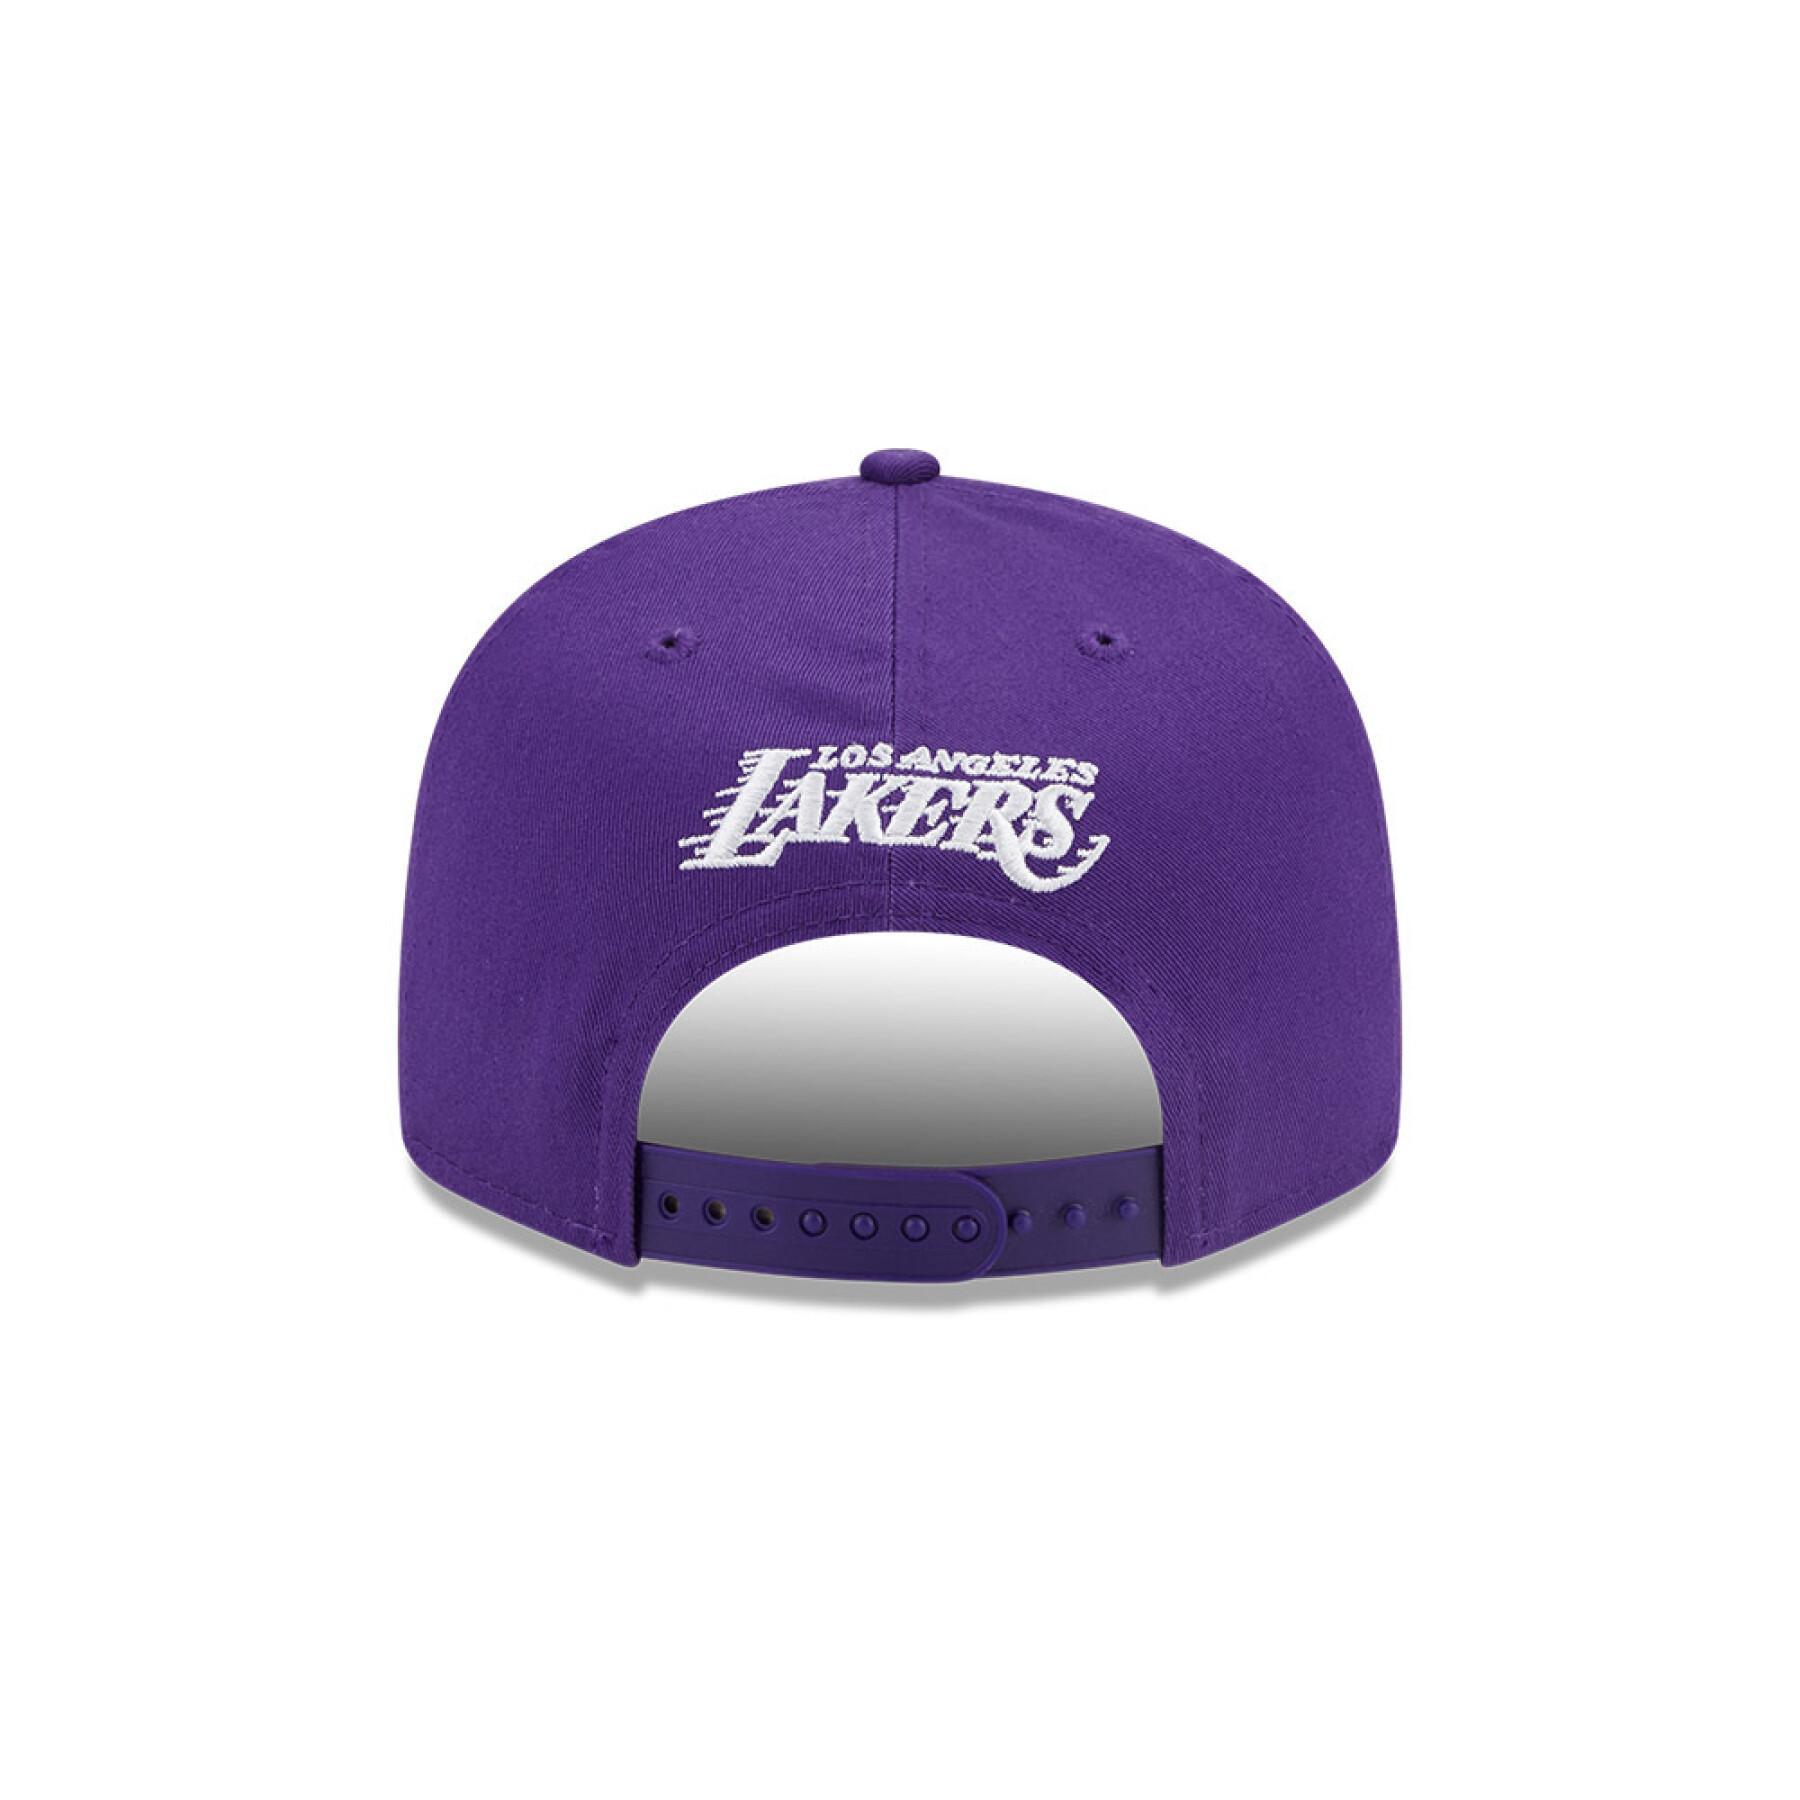 Cap 9fifty Los Angeles Lakers NBA Patch